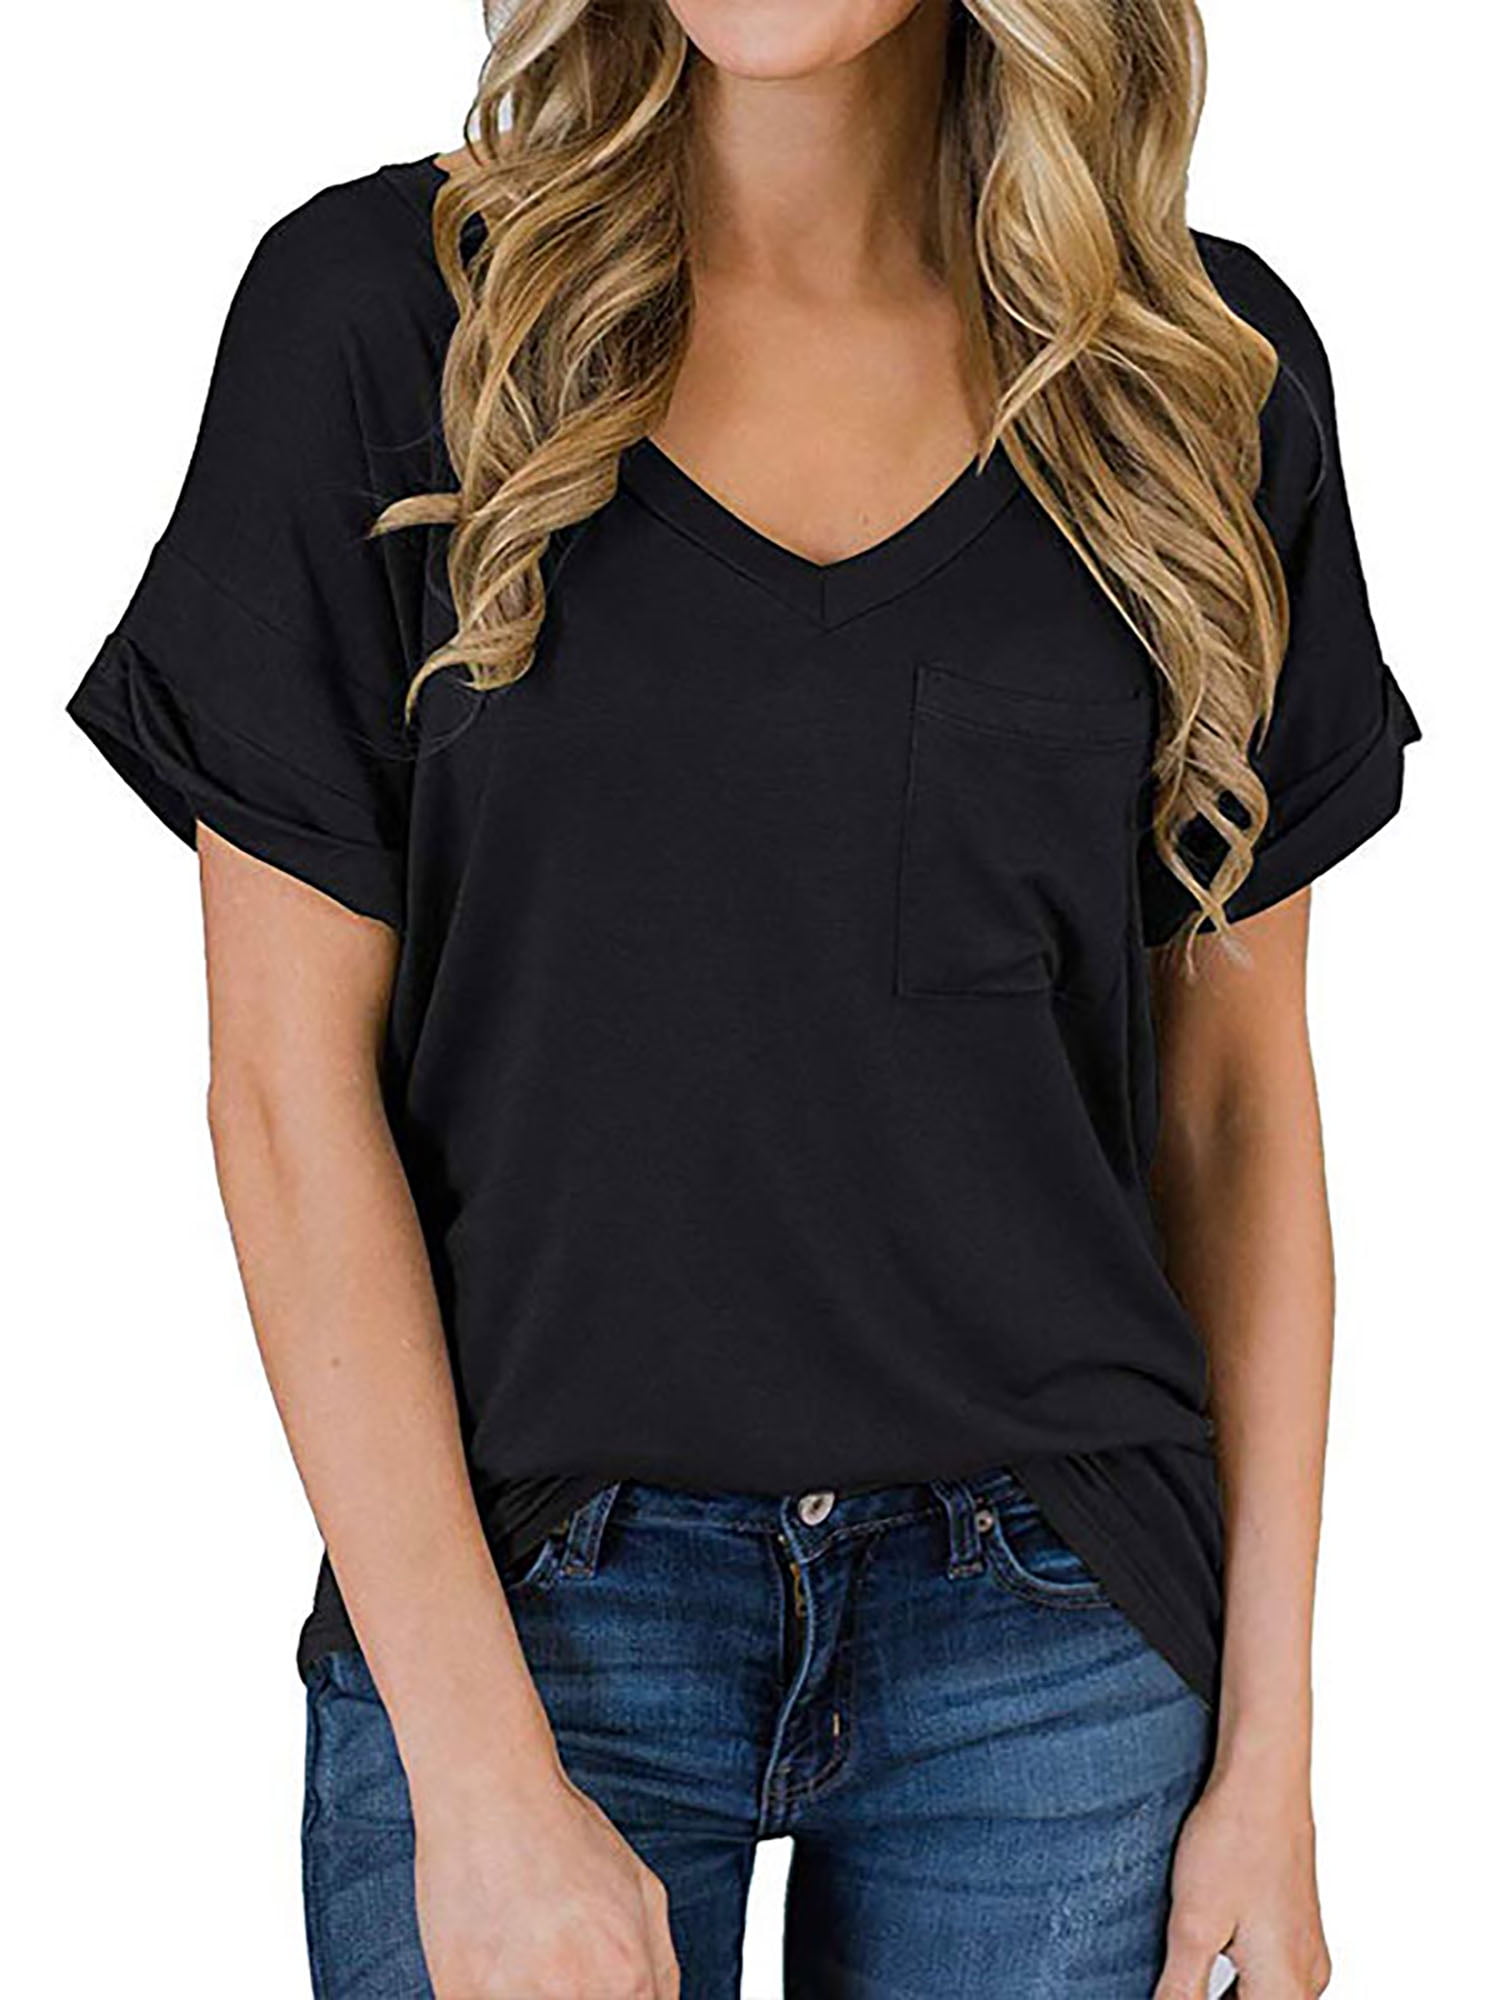 Women Solid Color Top Toxz Women Solid Color Blouse Short Sleeve V Neck Casual T-Shirt T-Shirt 